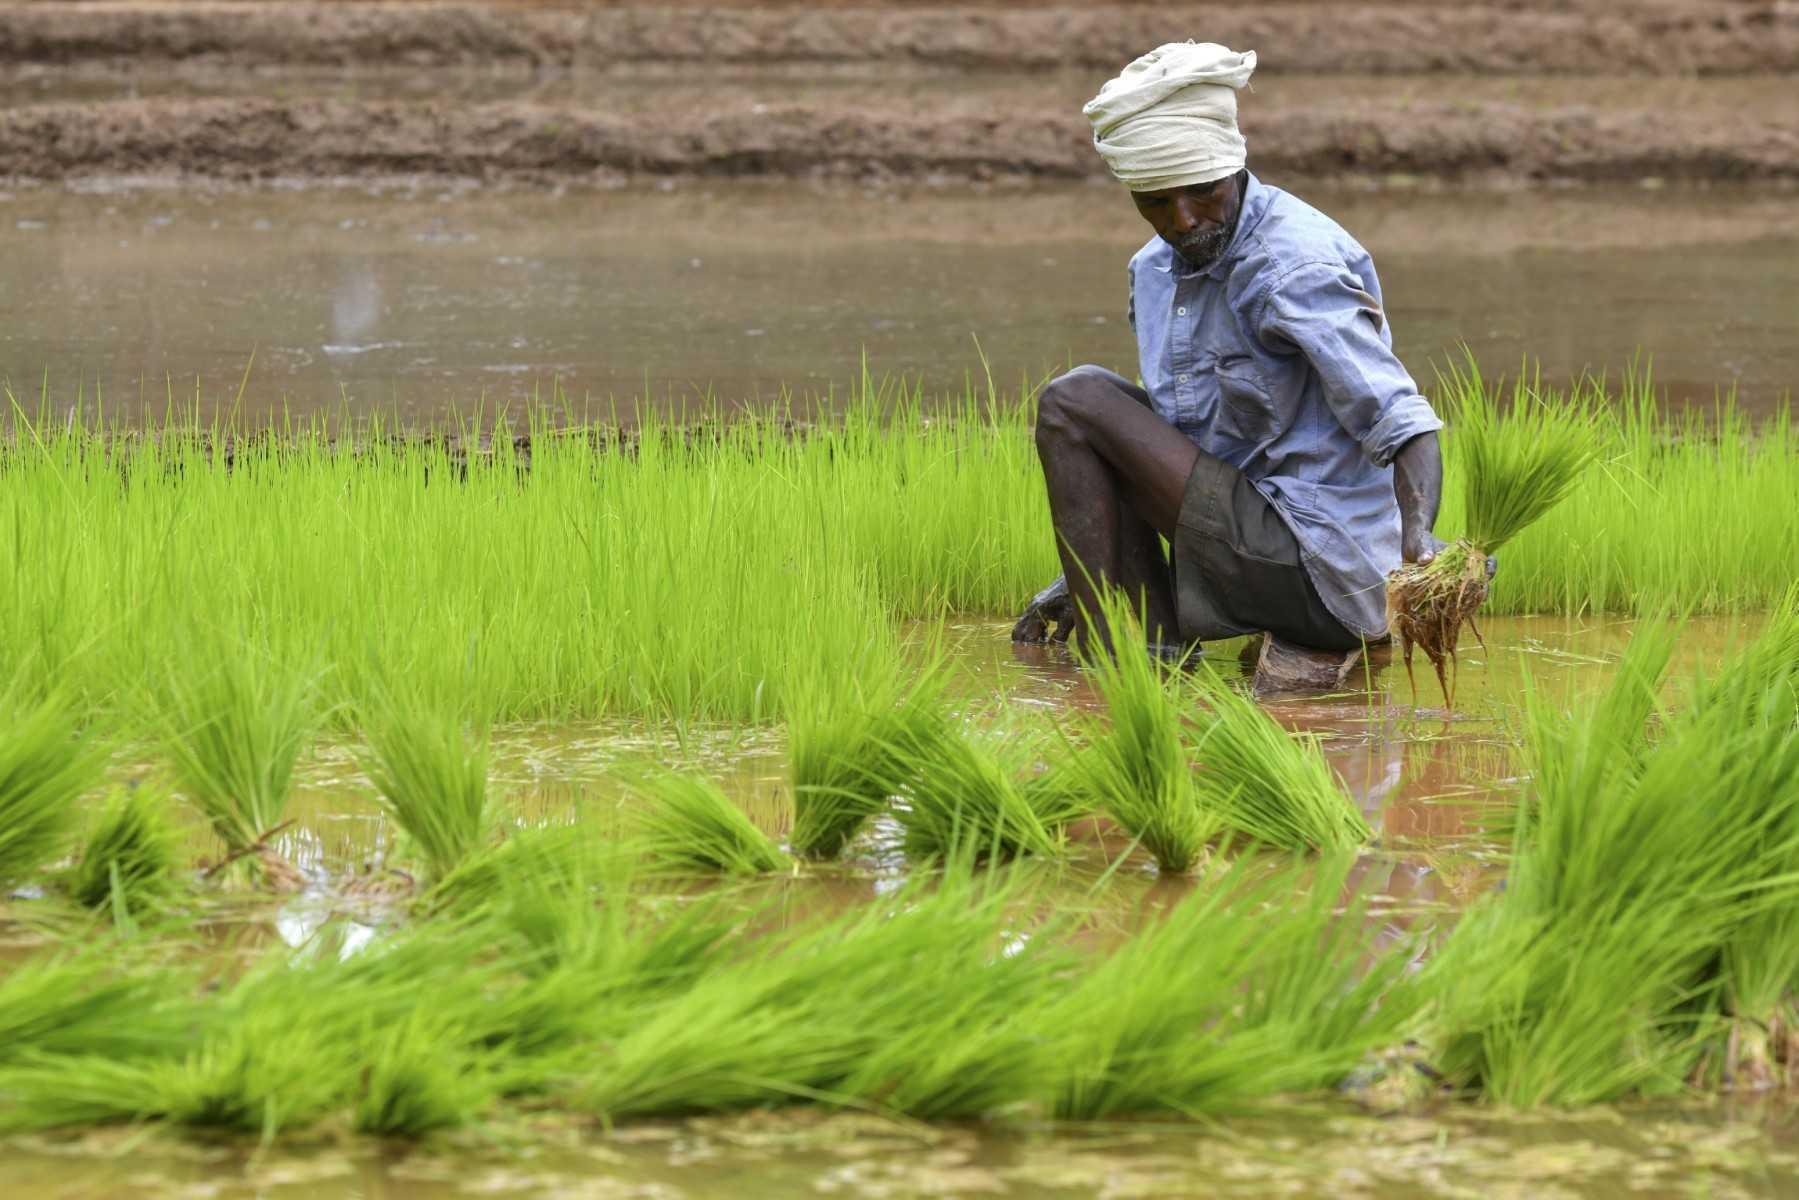 A farm labourer extracts rice paddy saplings into bunches before transplantation in a field for rice cultivation on the outskirts of Bangalore on July 28. Photo: AFP 